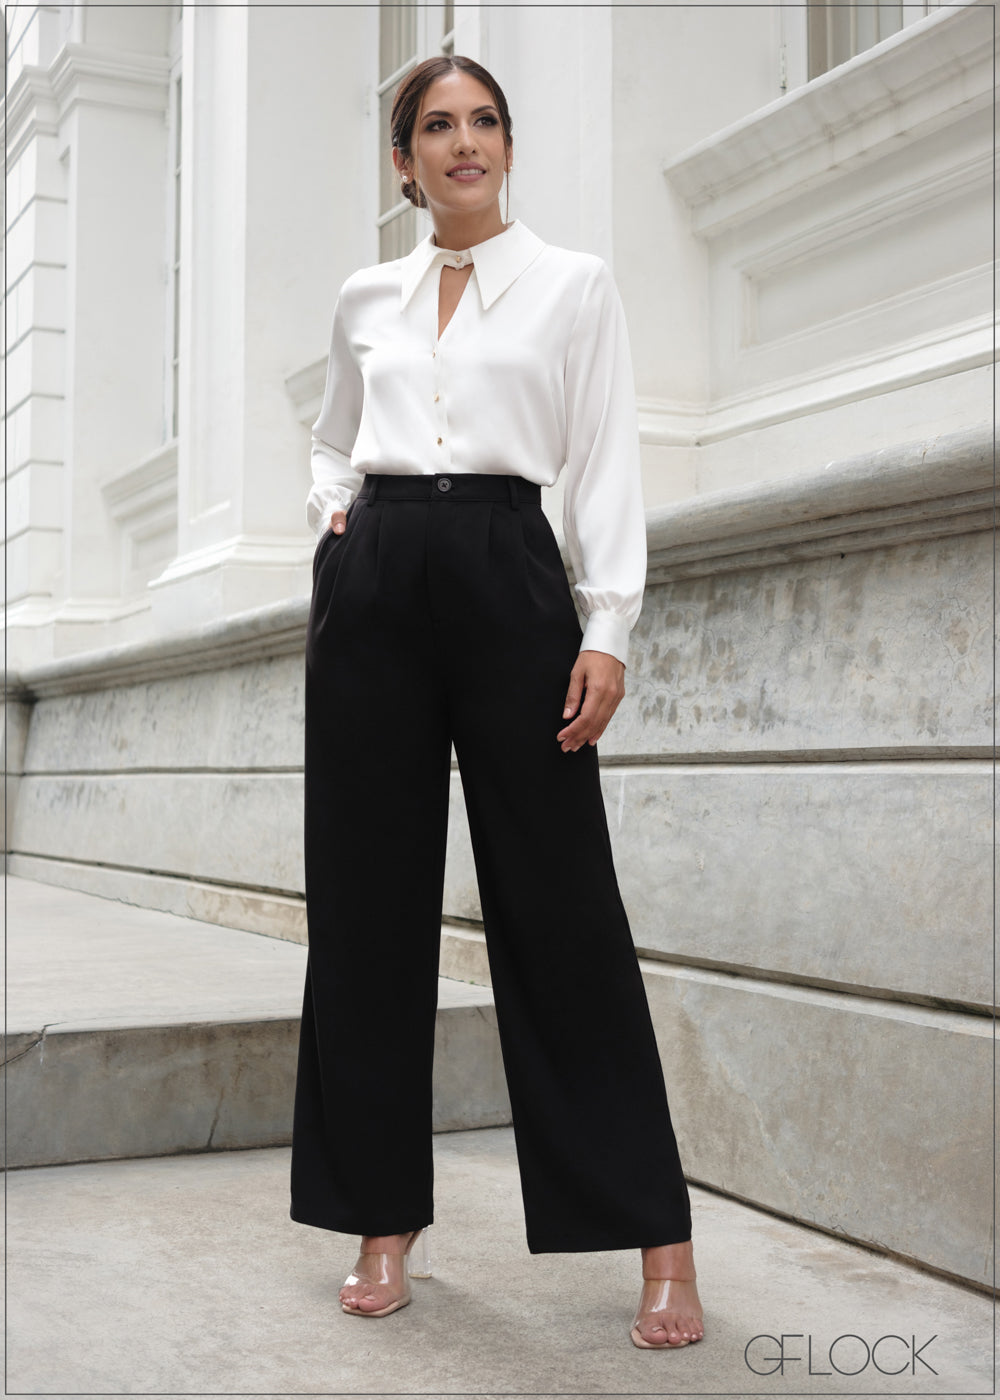 Work Outfit Idea WideLeg Trousers a ShortSleeve Blouse and Heels   Glamour